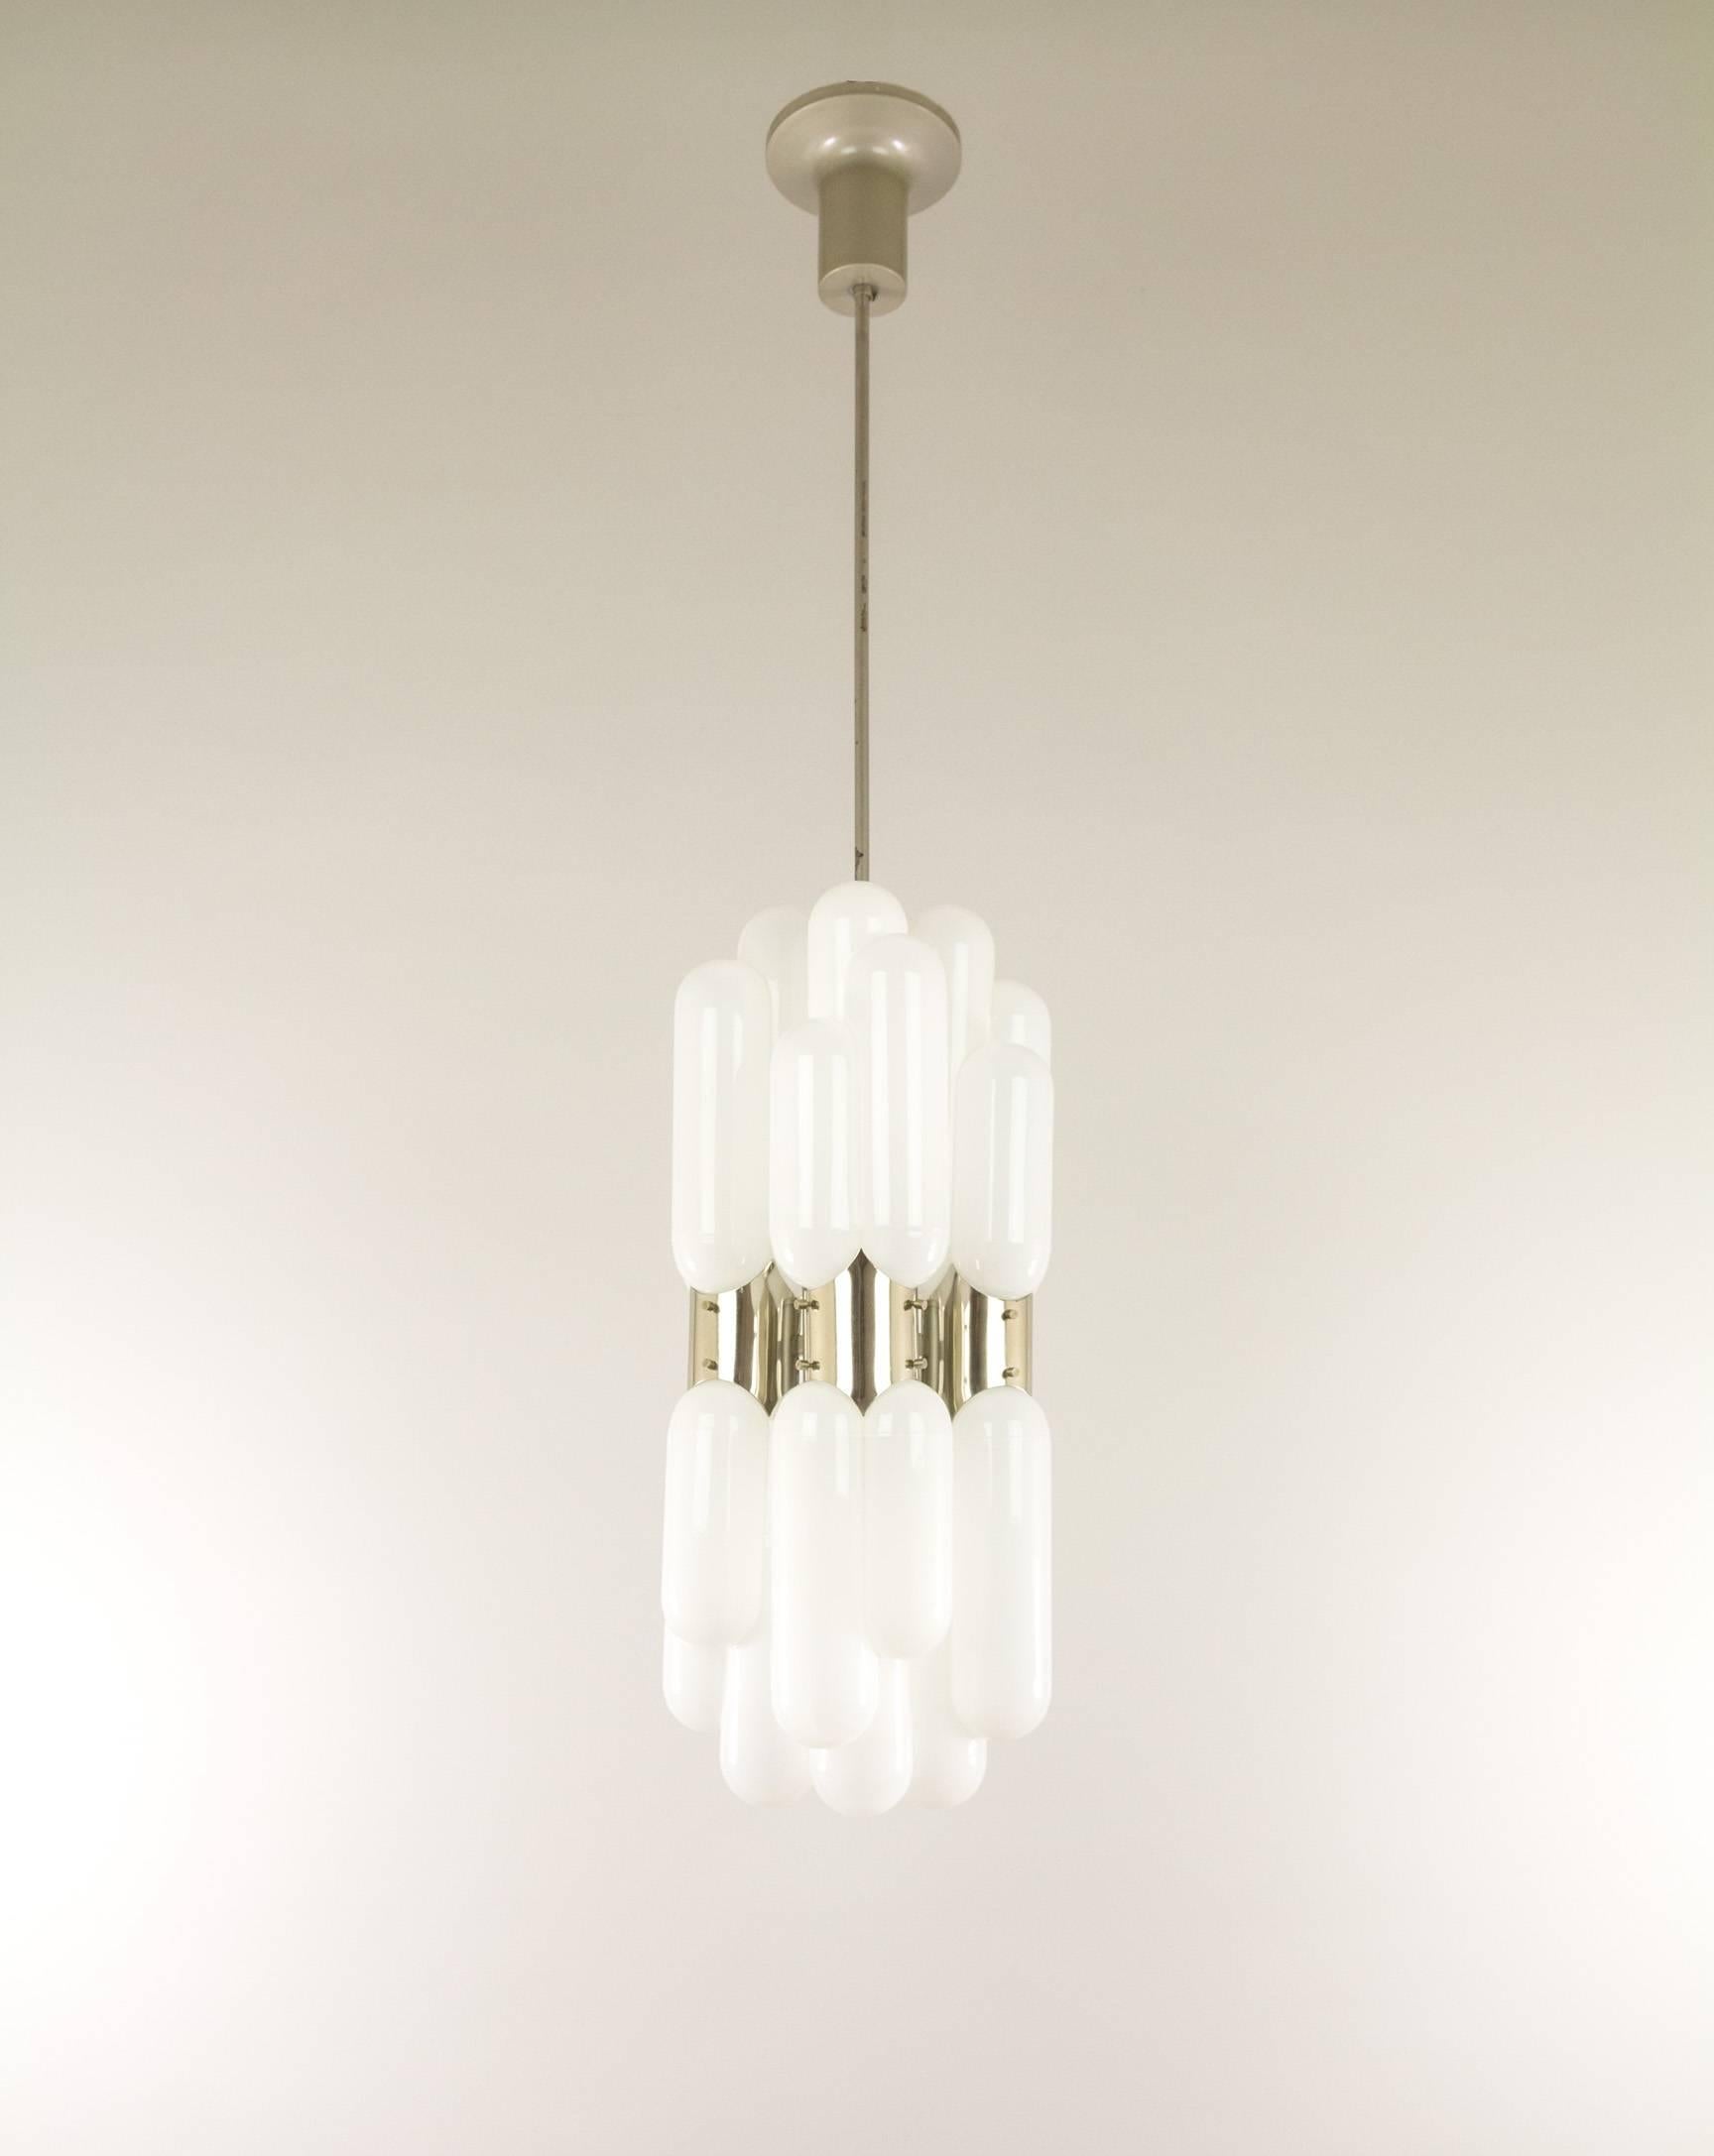 An extraordinary pendant designed by Carlo Nason and produced by AV Mazzega. The lamp is made of eight handblown opaline glass pieces, each consisting of three tubes in differing lengths.

Measure: Each double light fitting is 57 cm long. The